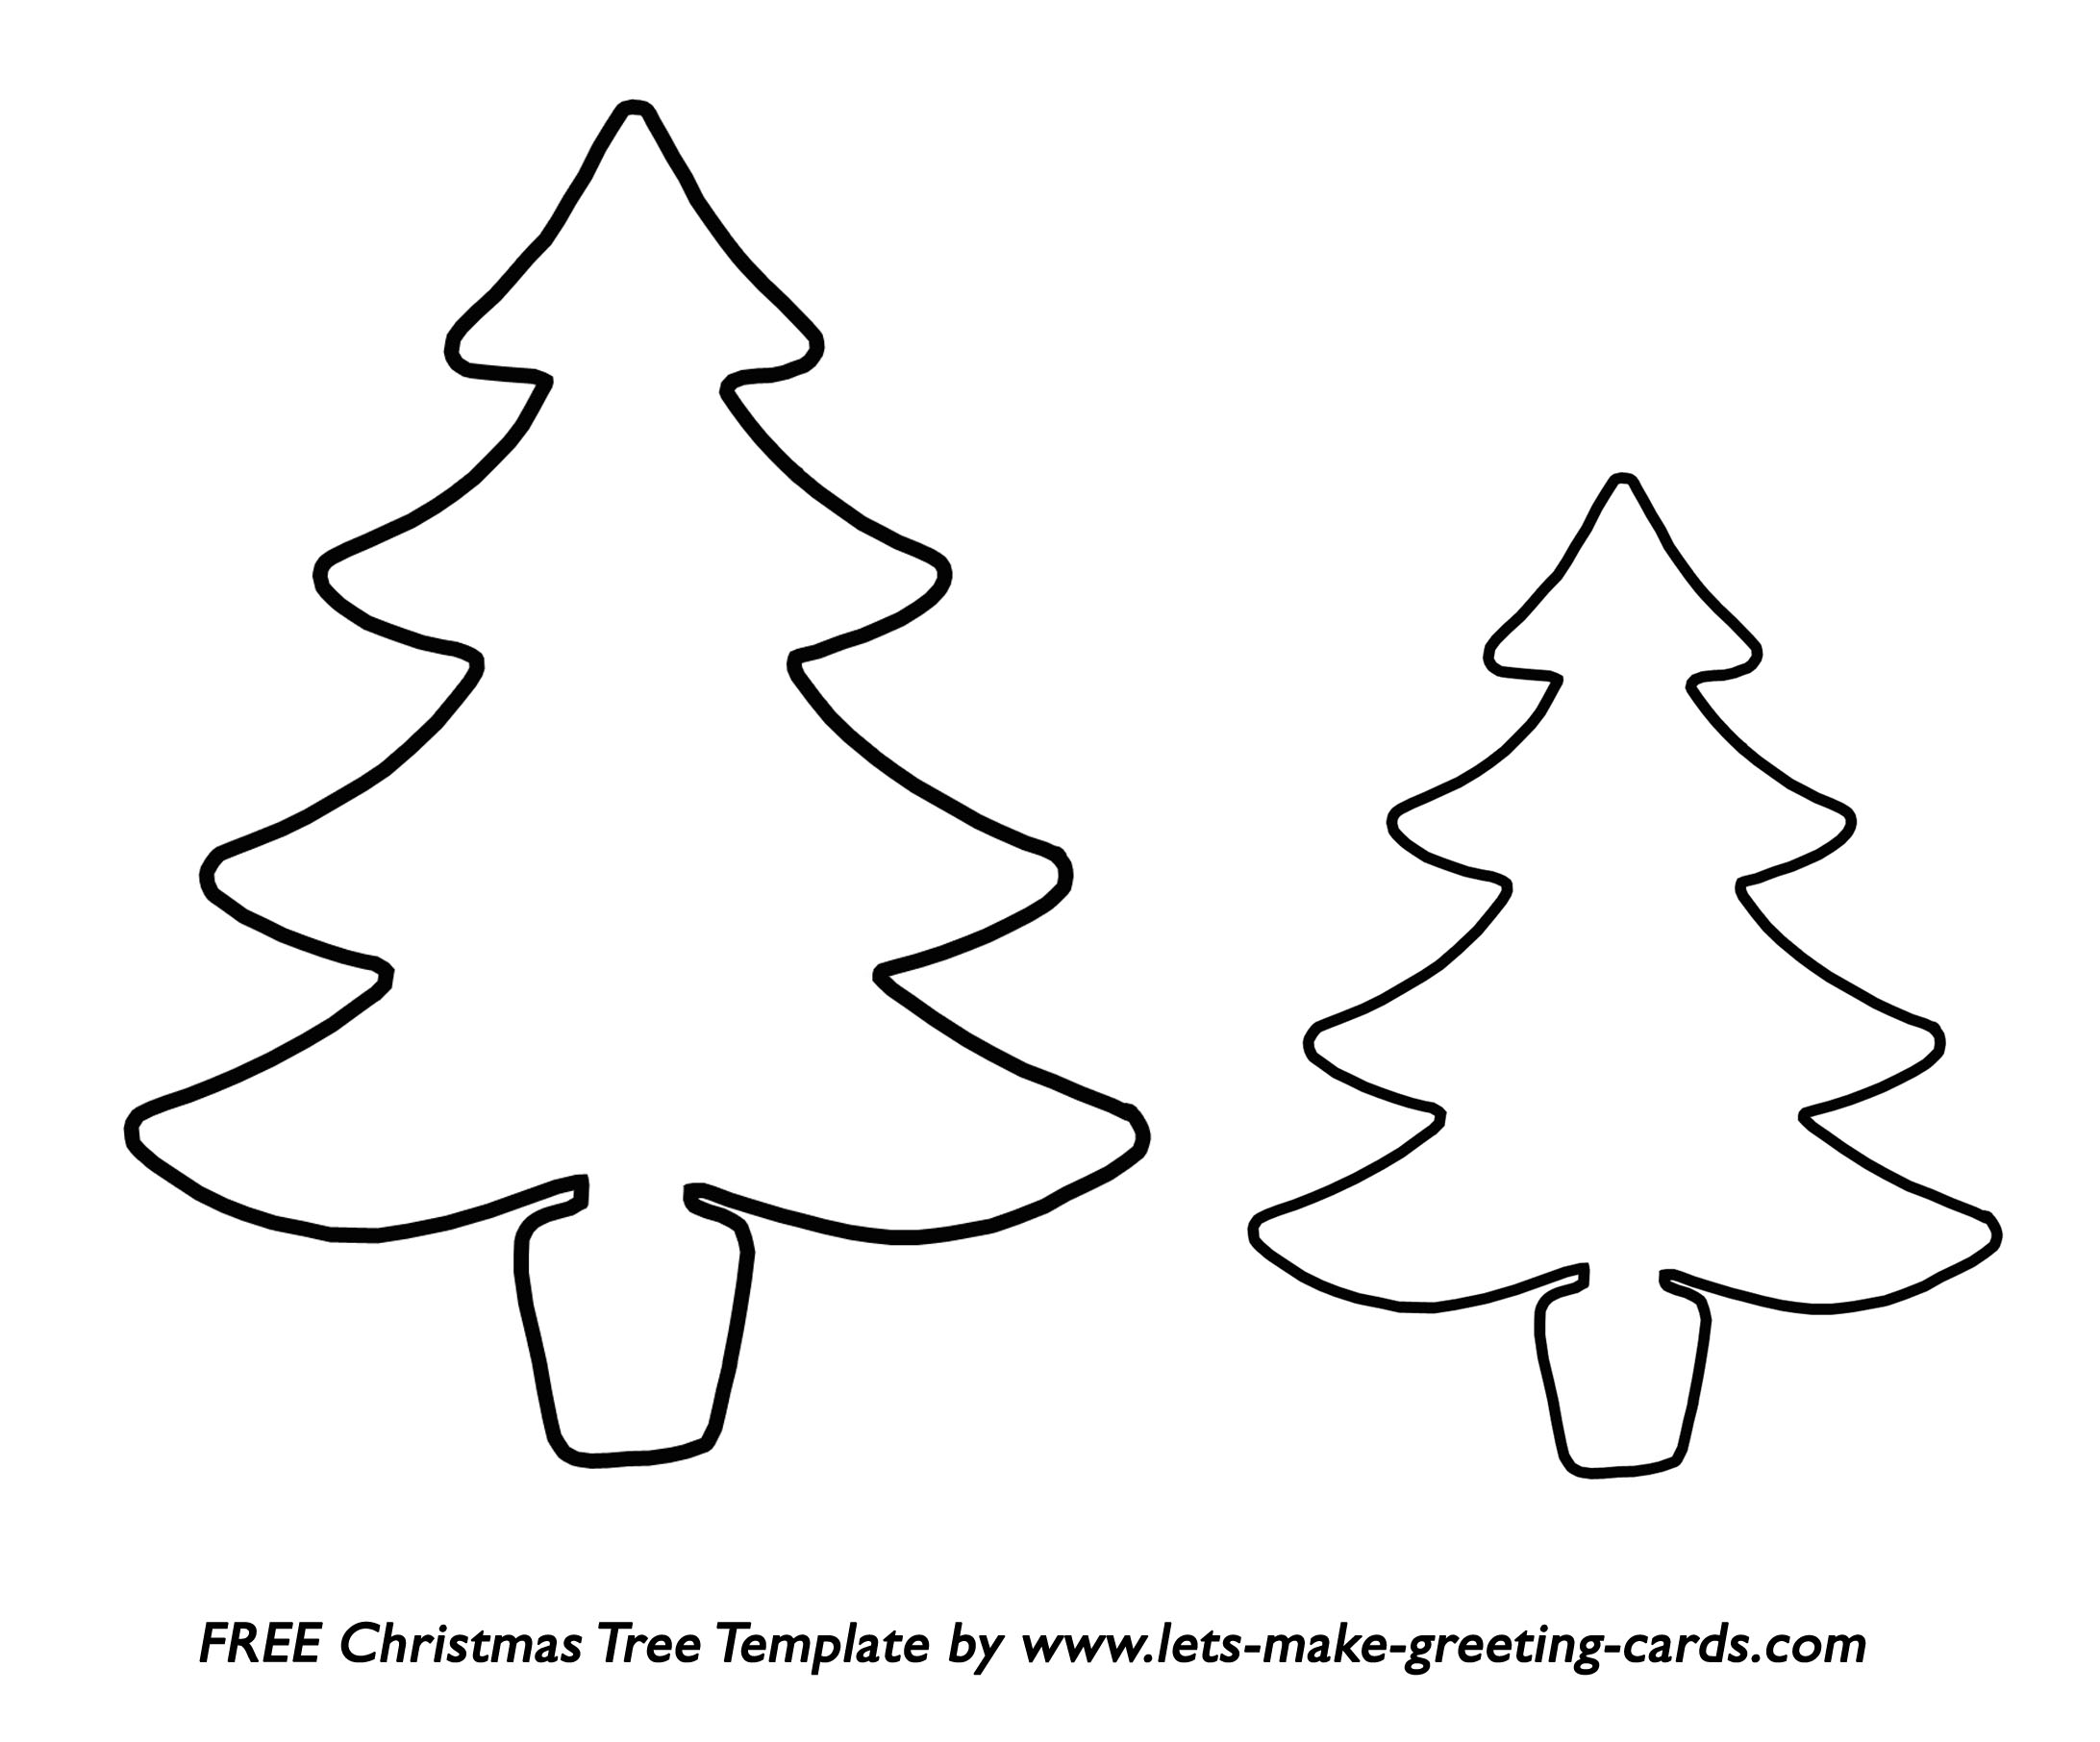 Cut Out Christmas Tree Templates images